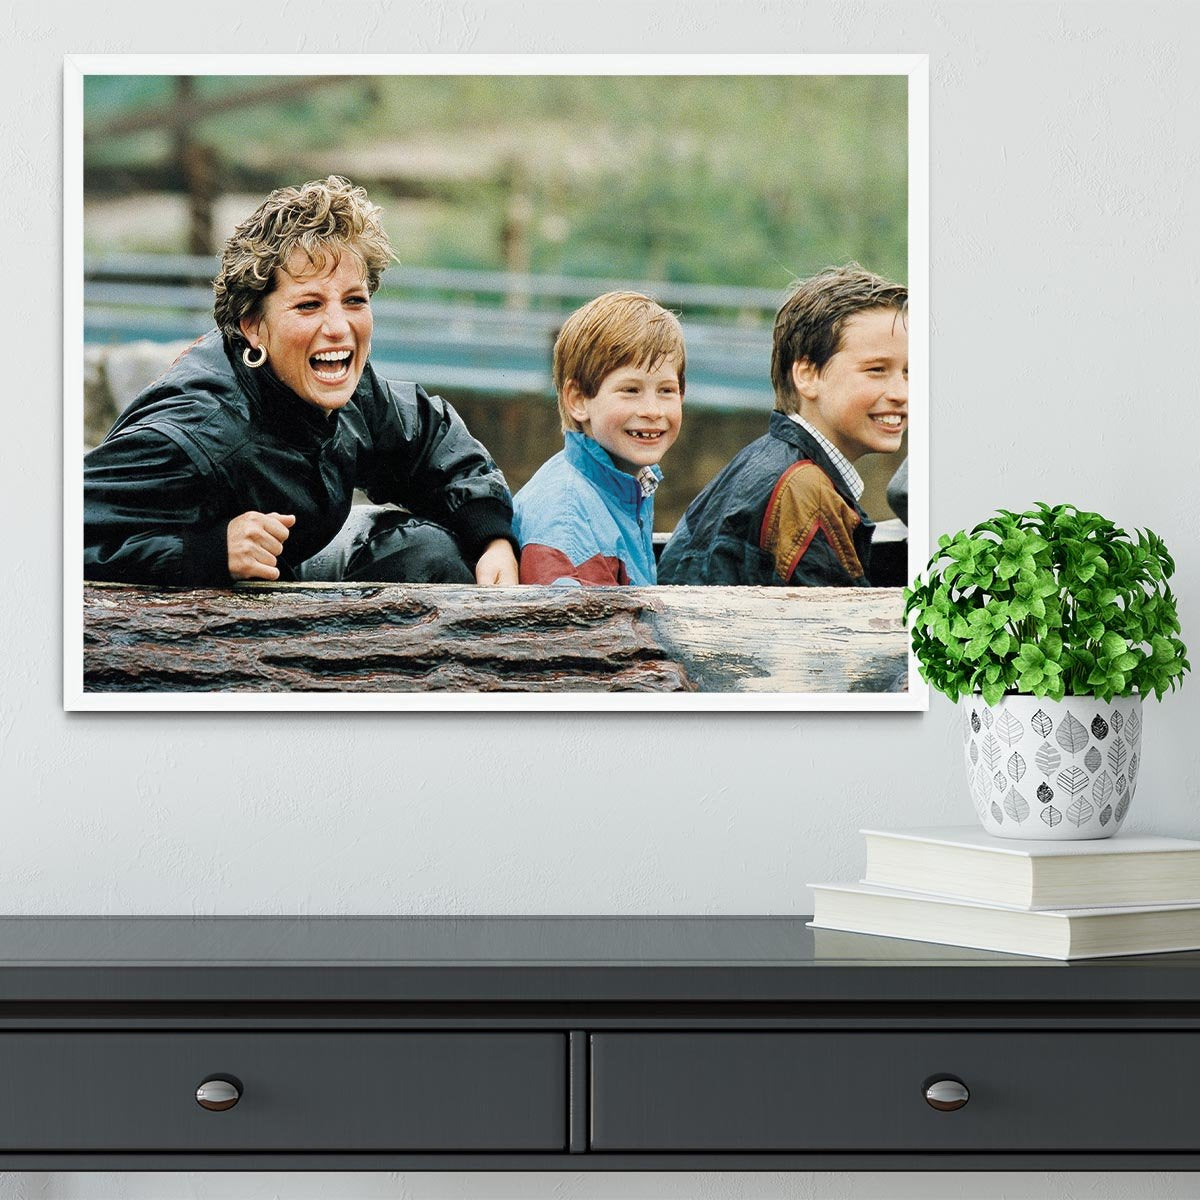 Princess Diana with Prince William and Prince Harry on ride Framed Print - Canvas Art Rocks -6